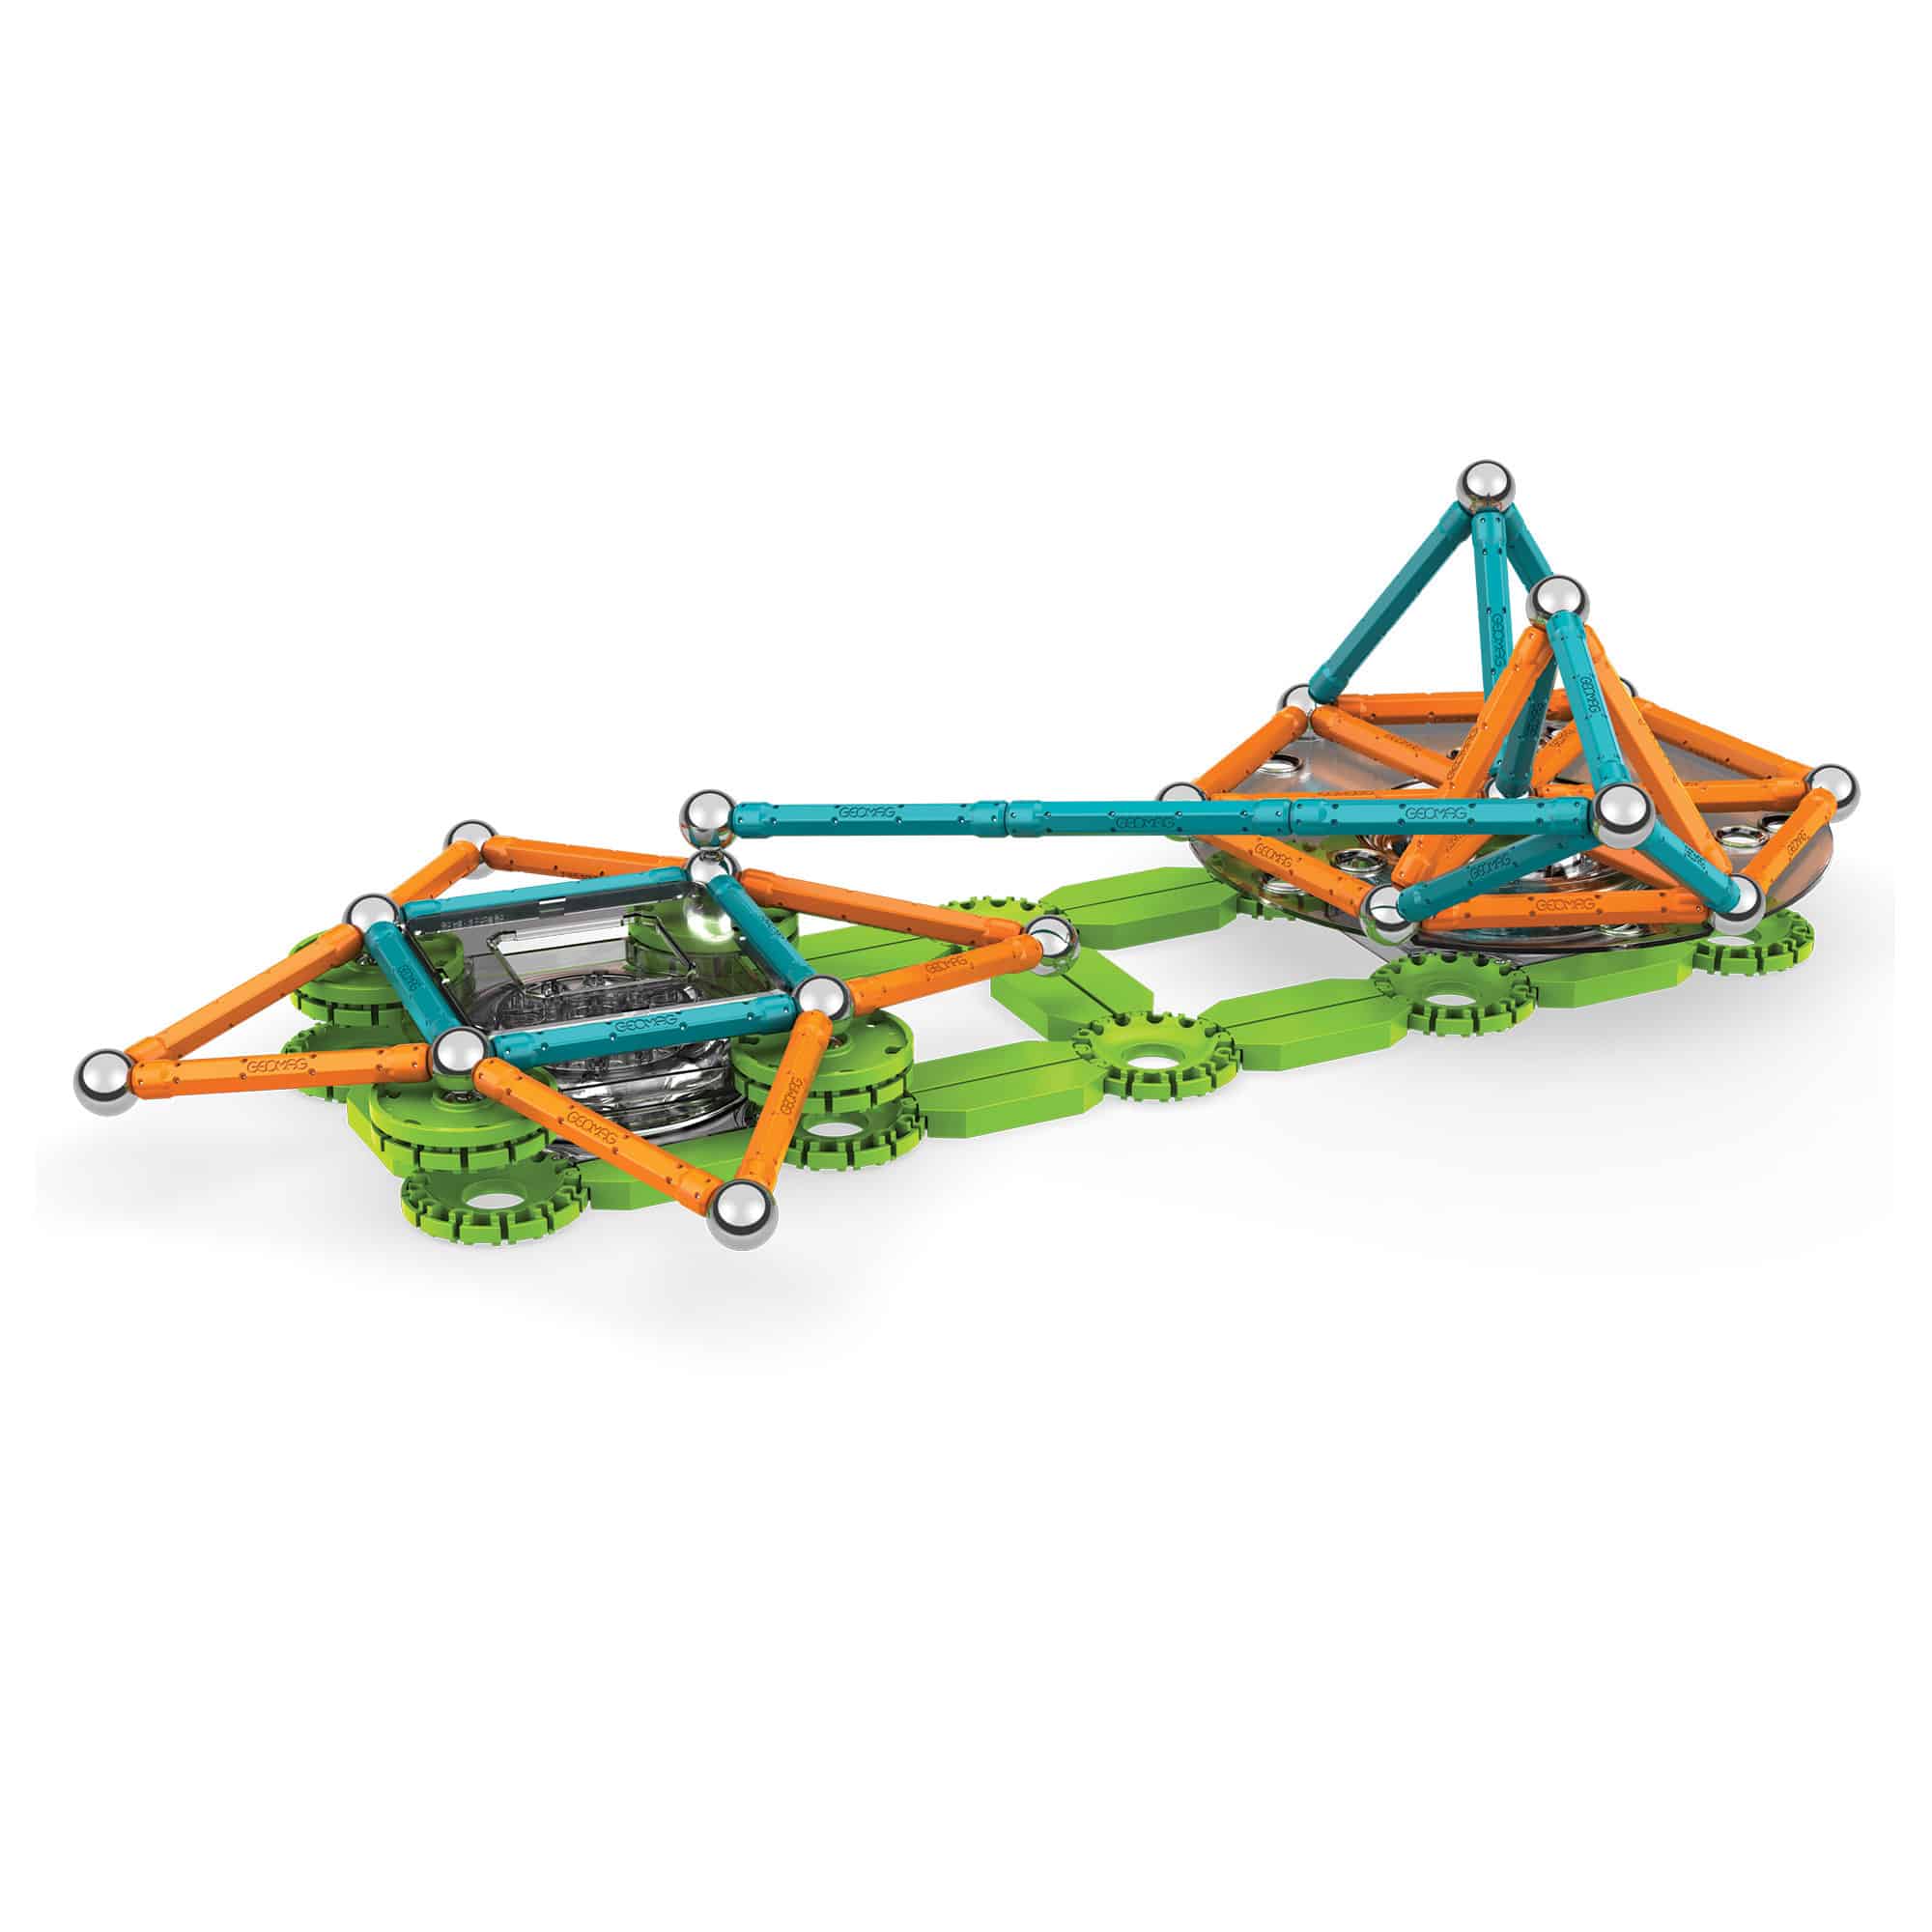 Geomag - Mechanics Motion Recycled Magnetic Gears 160